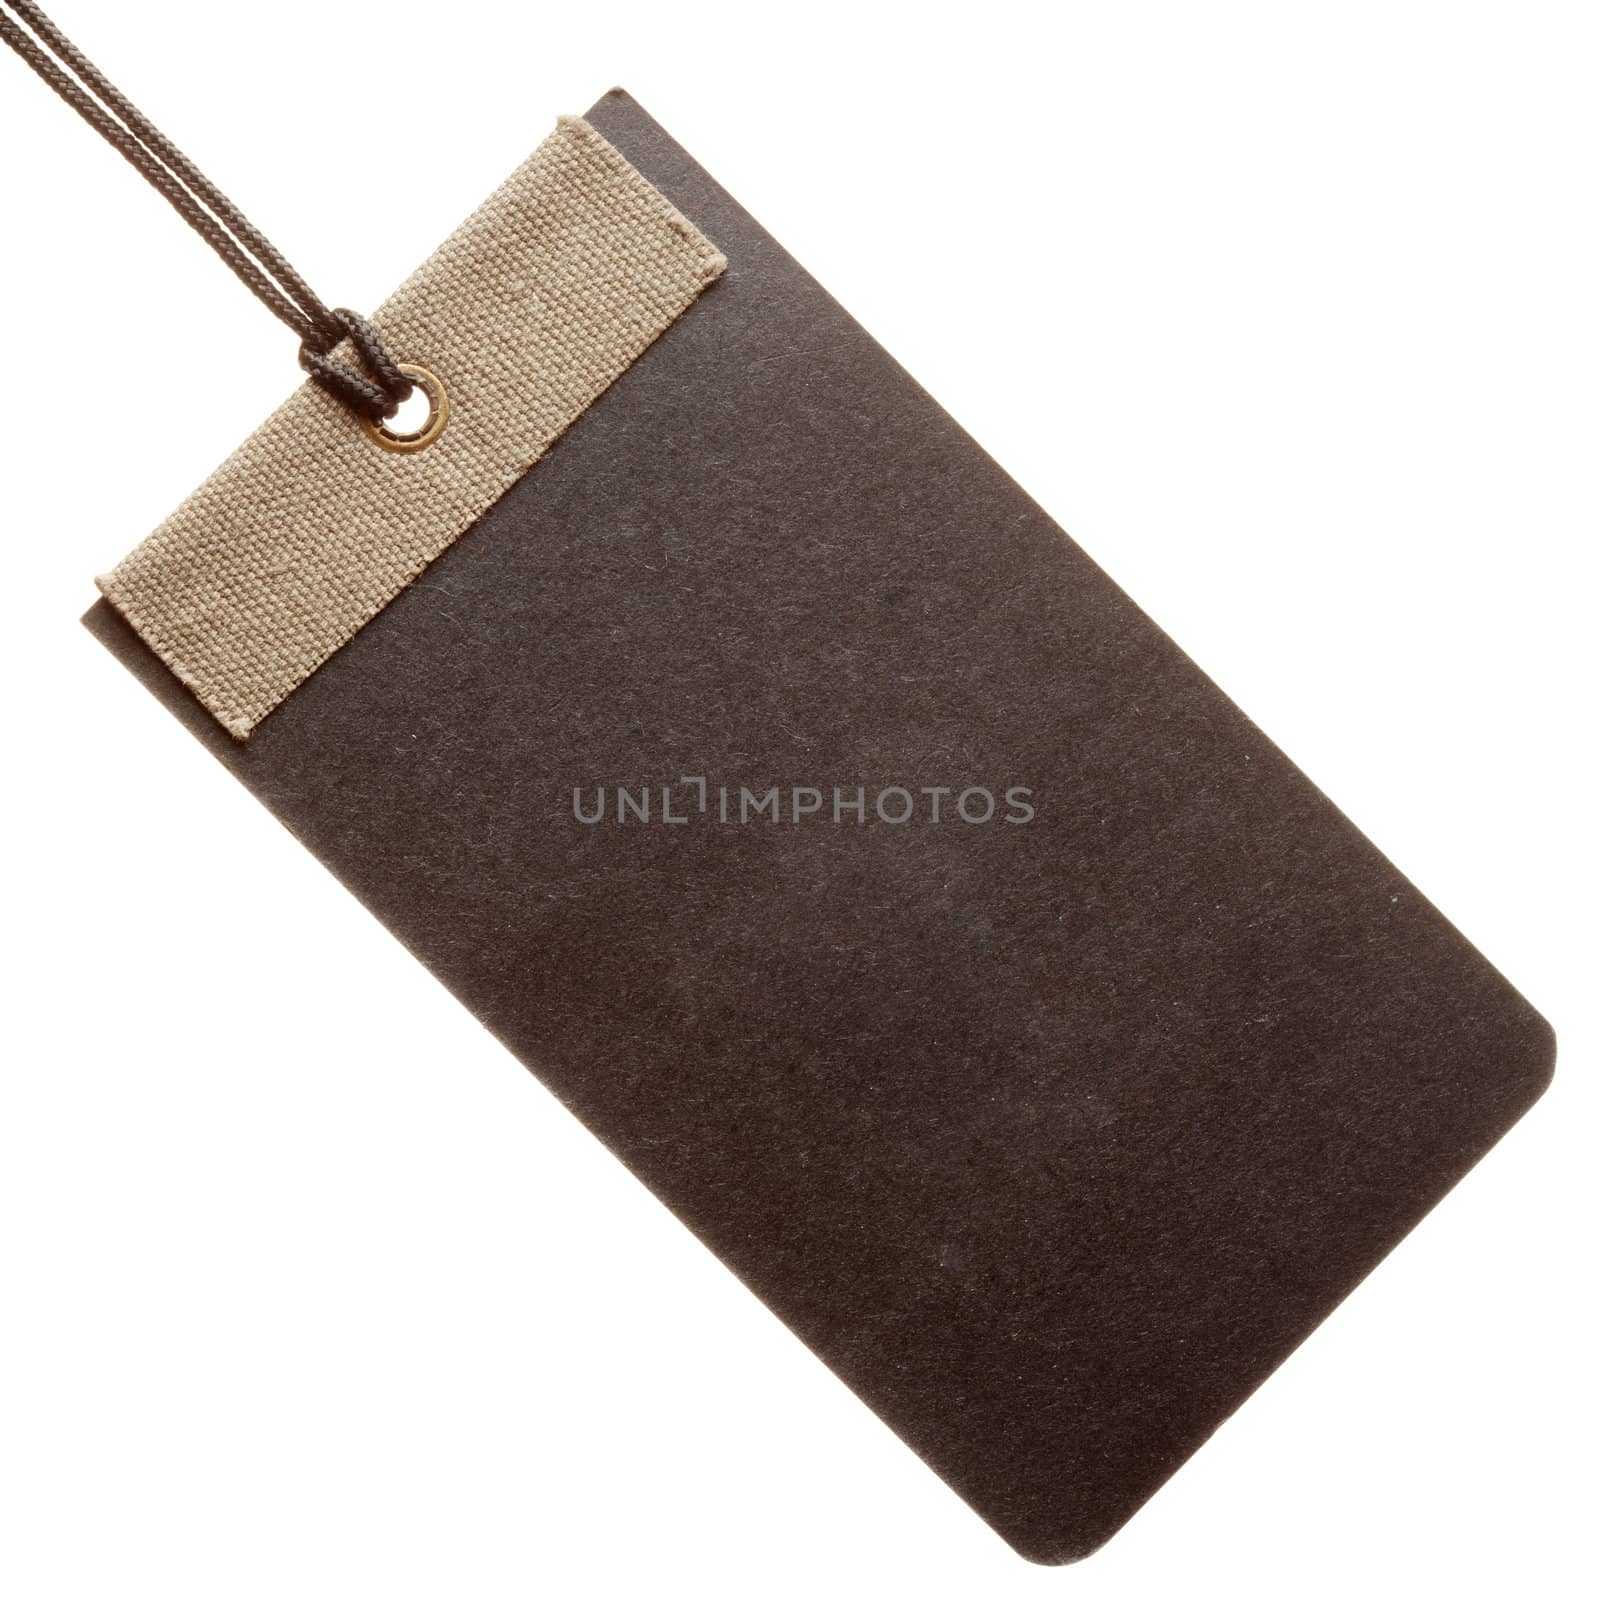 Black paper tag isolated on white background